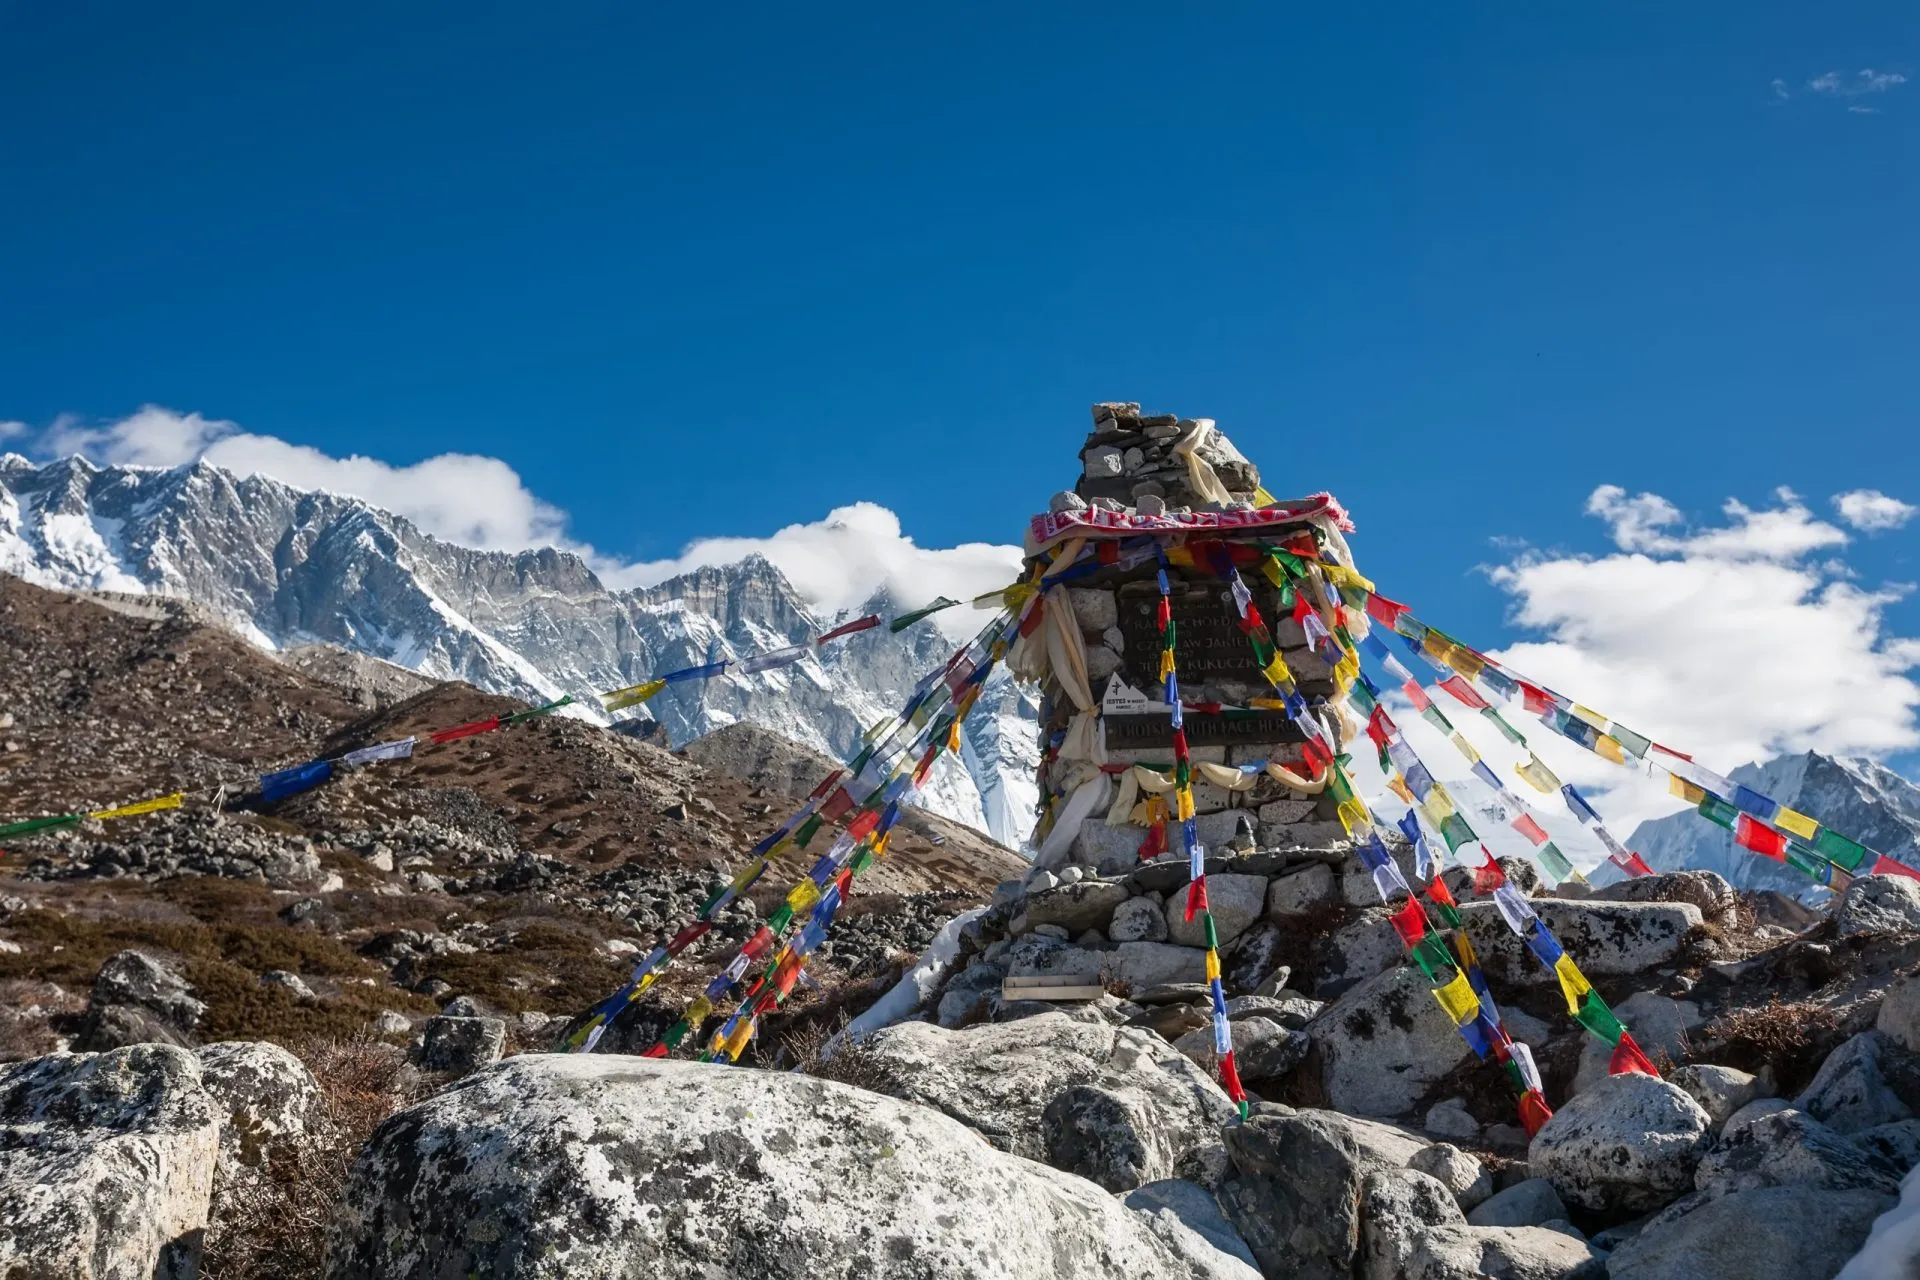 Memorial to all who died while climbing Everest